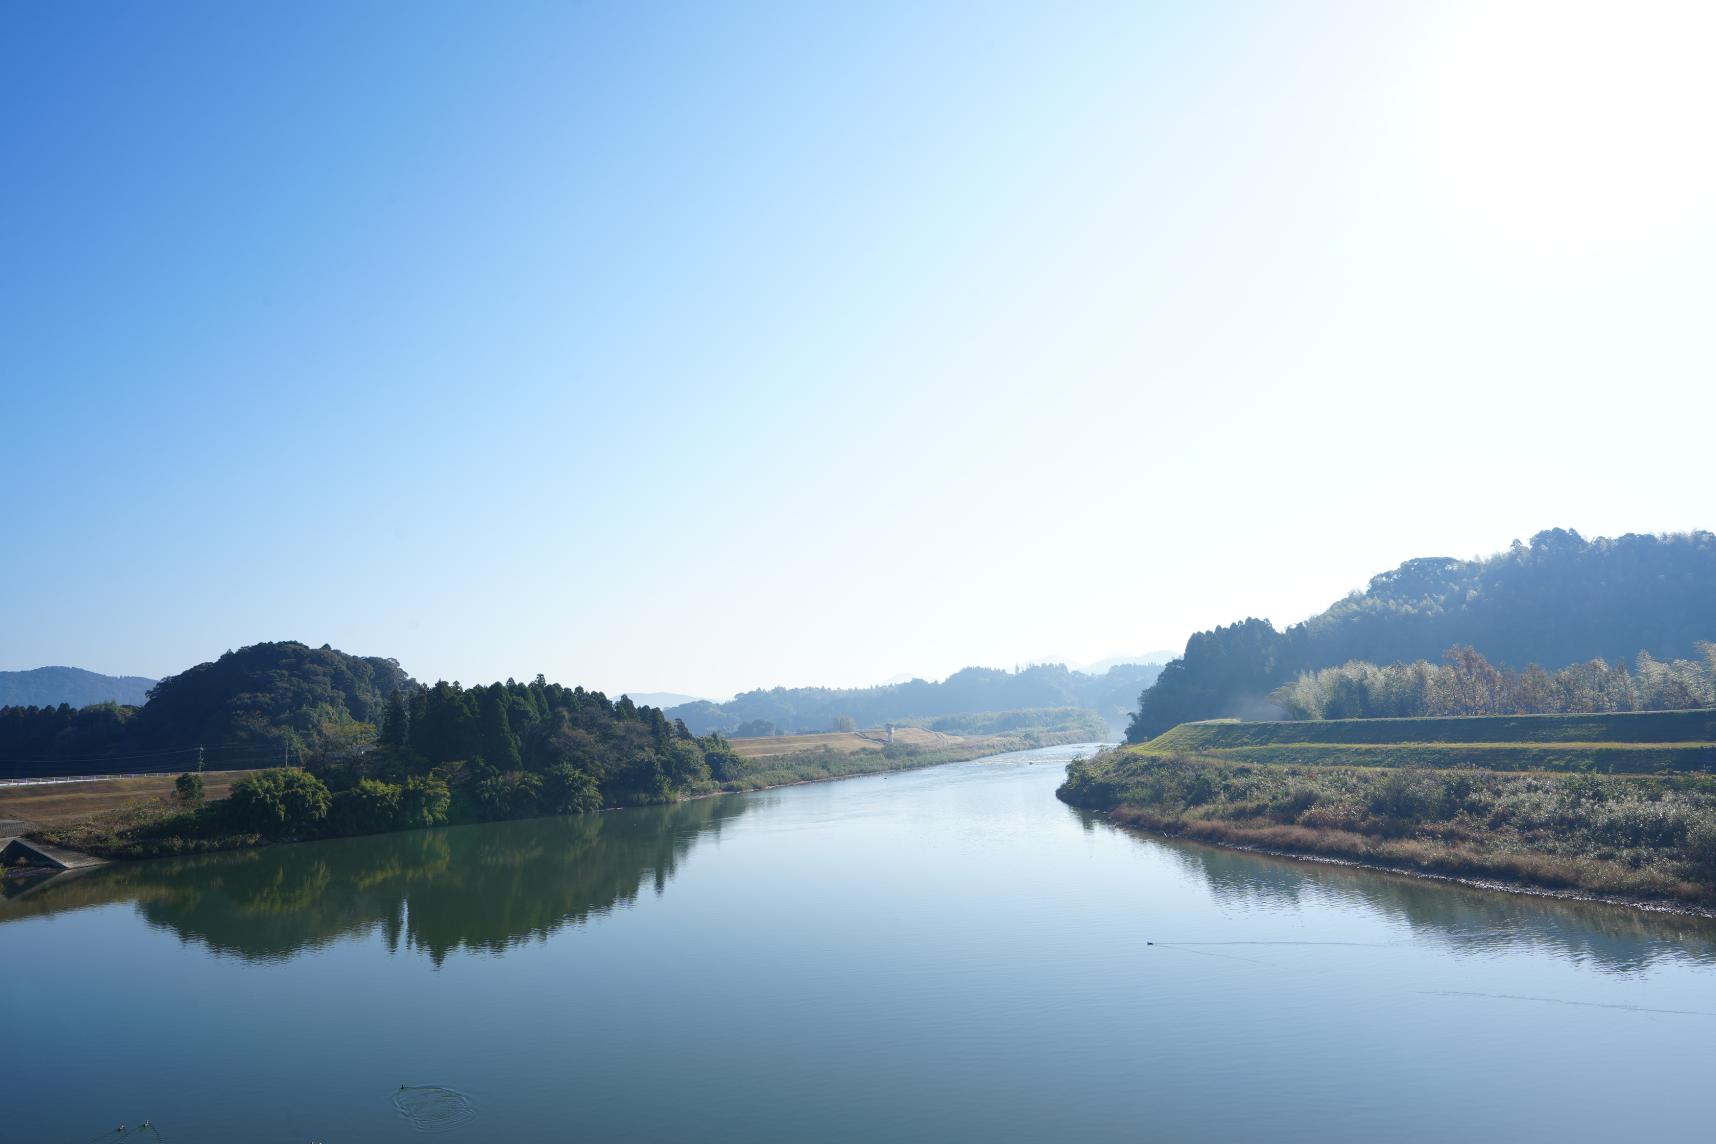 Introducing sightseeing spots in the Sendai River Basin-0